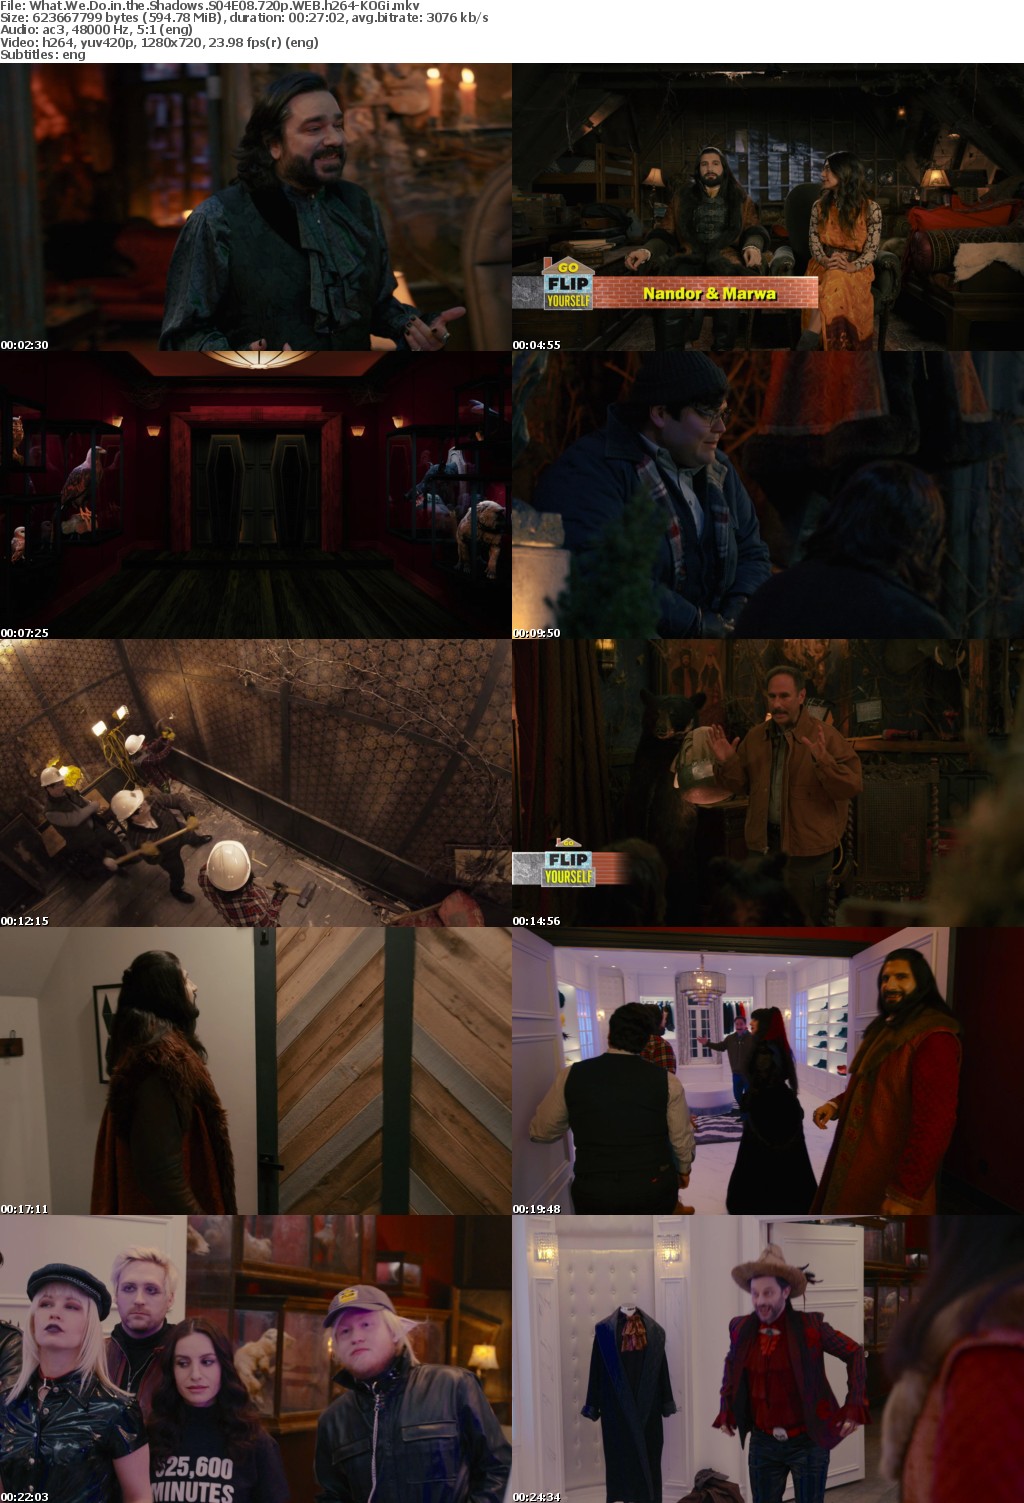 What We Do in the Shadows S04E08 720p WEB h264-KOGi